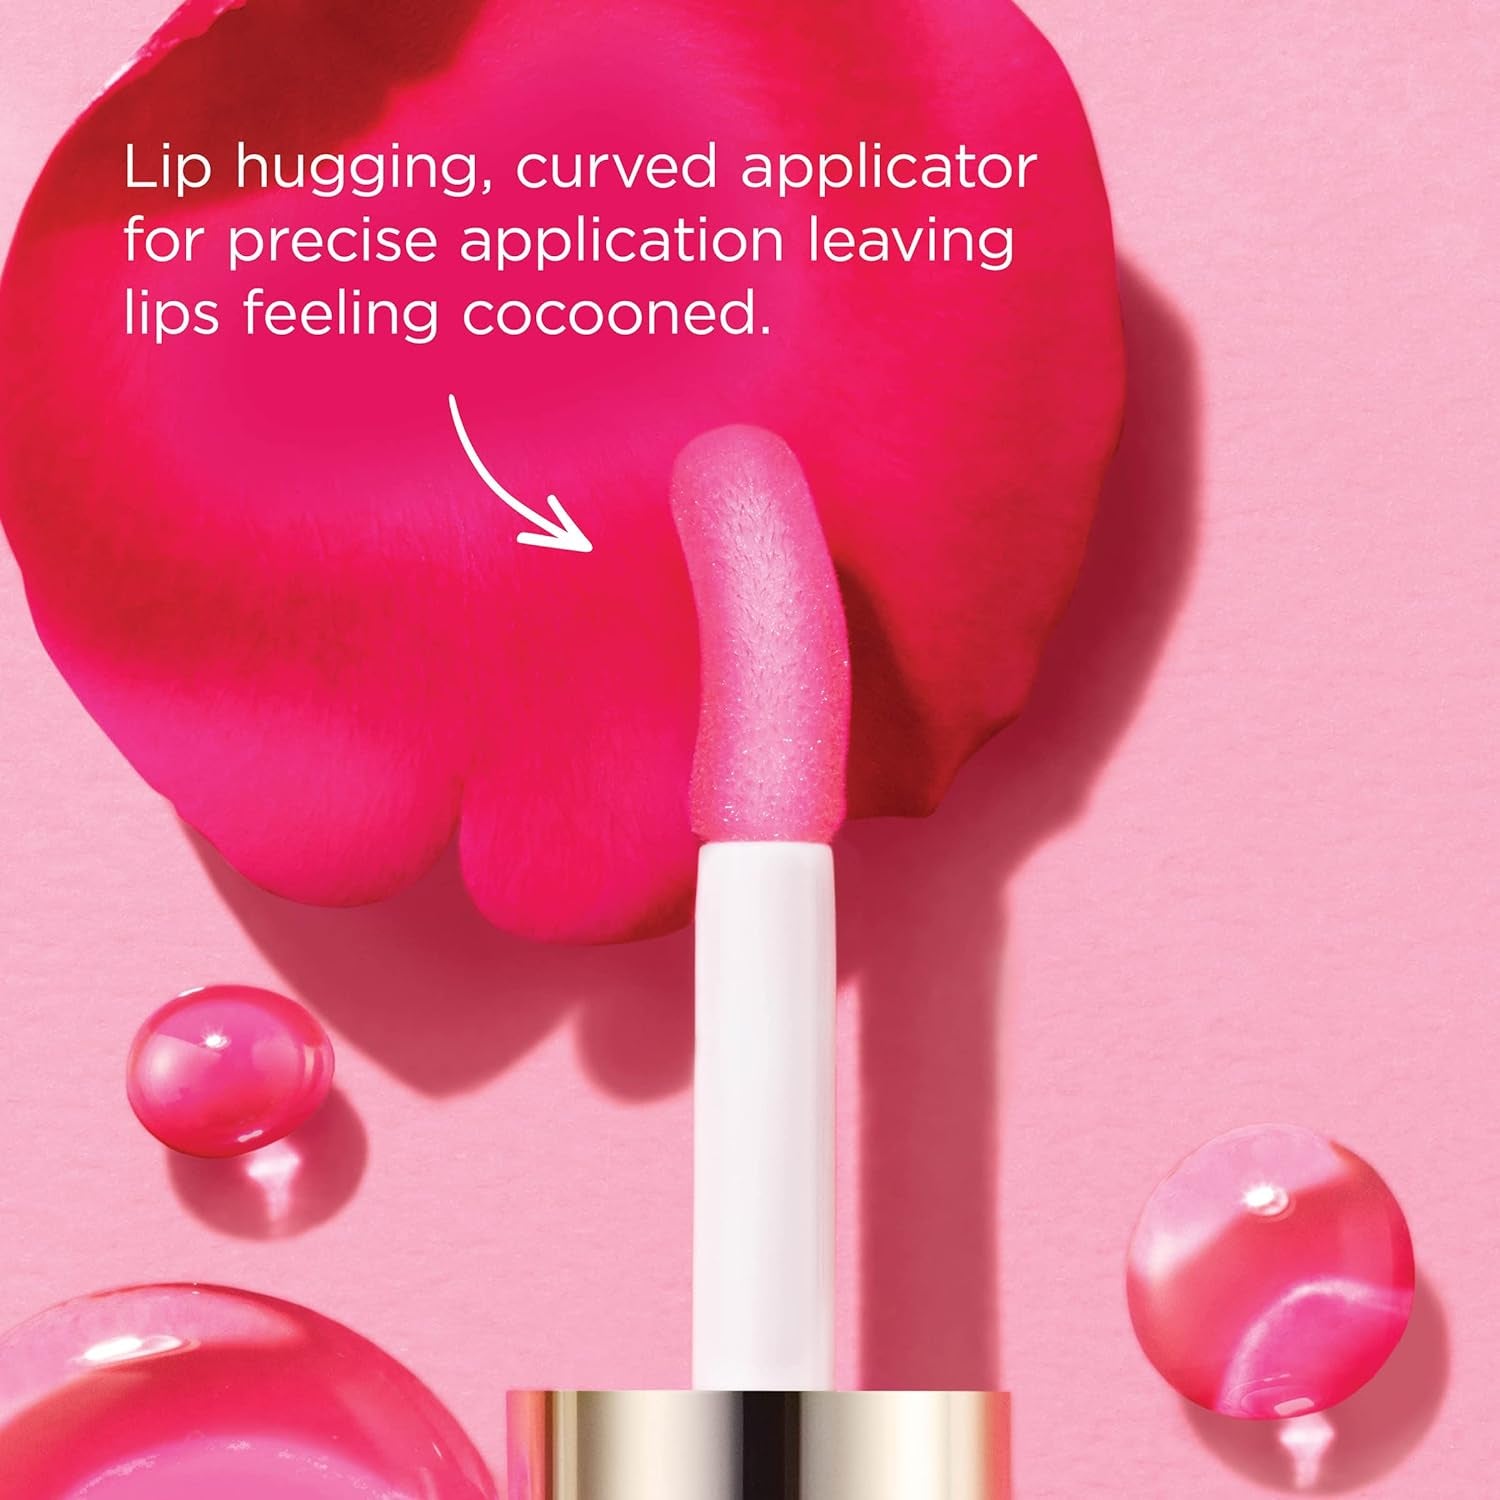 "Clarins Lip Comfort Oil: Hydrating, Plumping, and Nourishing Sheer Lip Treatment"